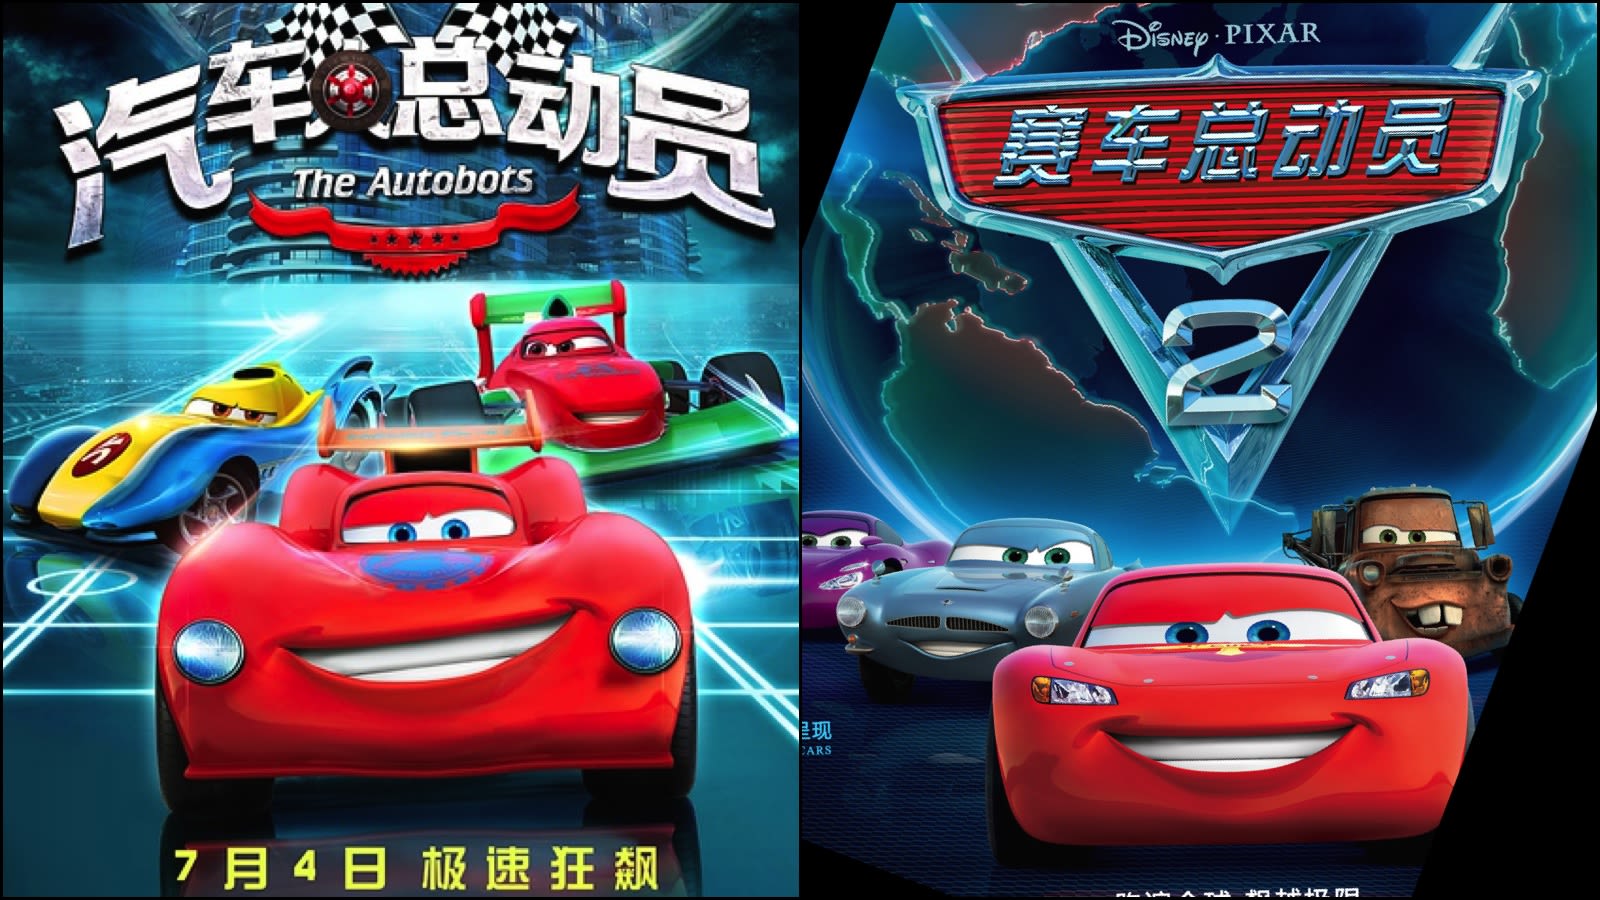 Chinese 'knock-off' of Disney's 'Cars' set for sequel | CNN